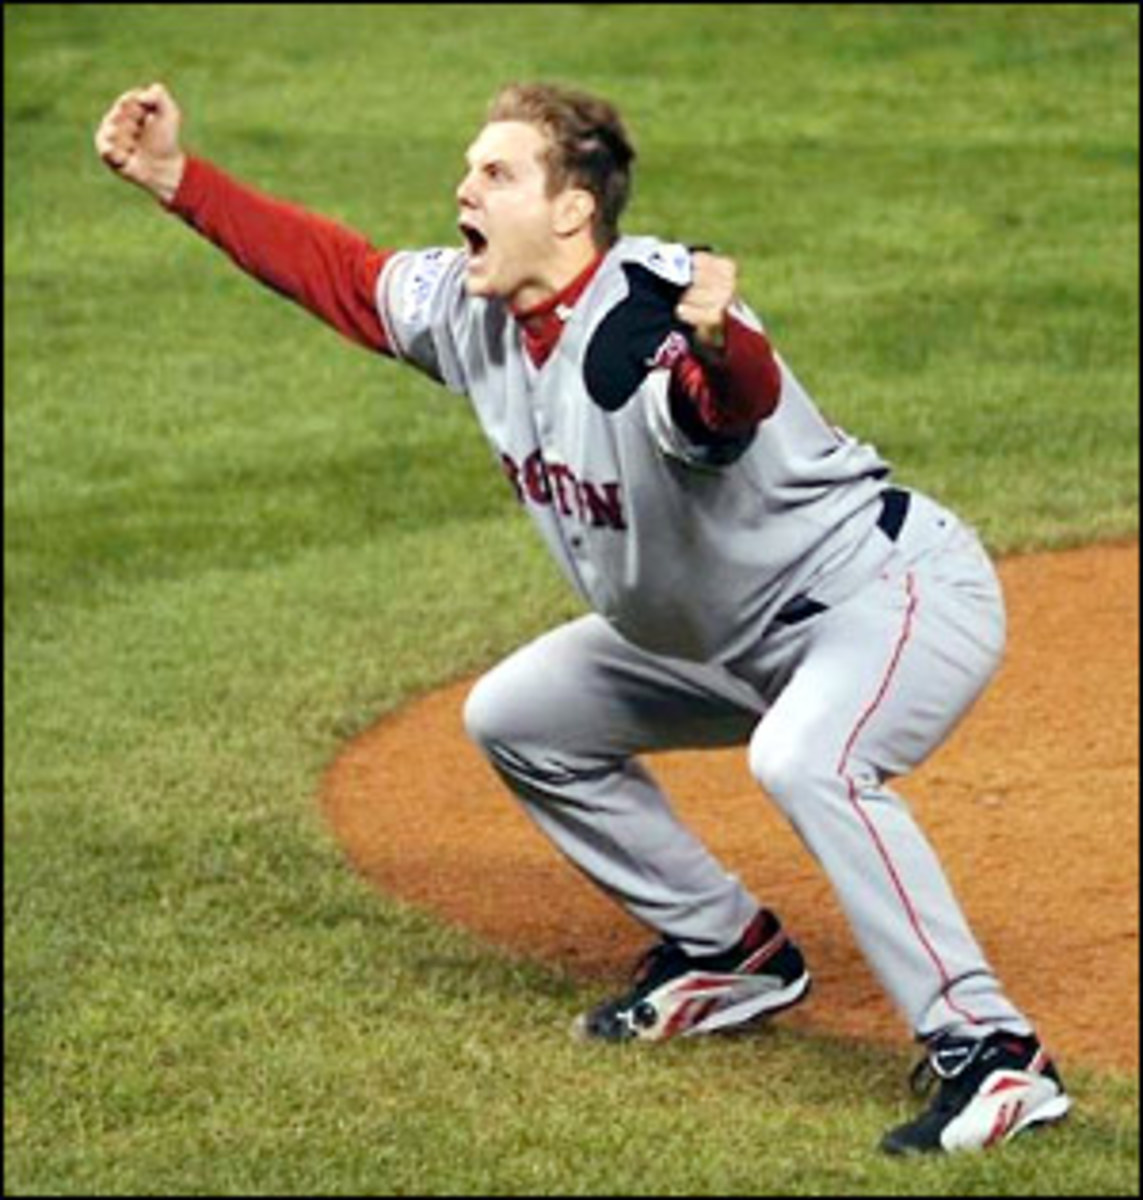 Boston Red Sox closing pitcher Jonathan Papelbon throws a pitch in